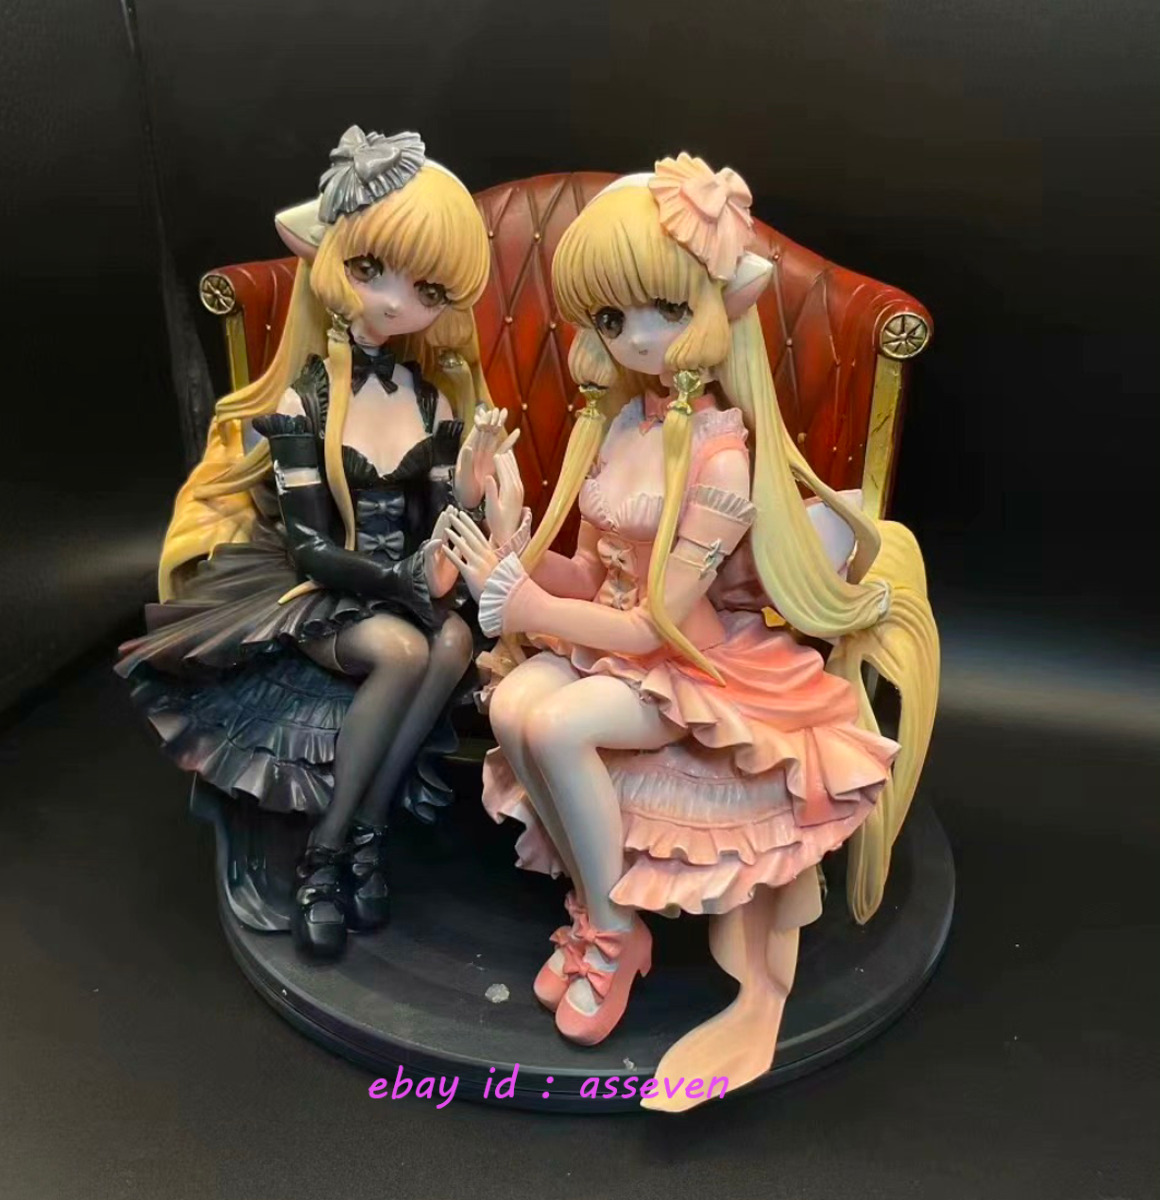 Unpainted Resin Chobits Sofa GK Limited edition Collection Figure Model In Stock